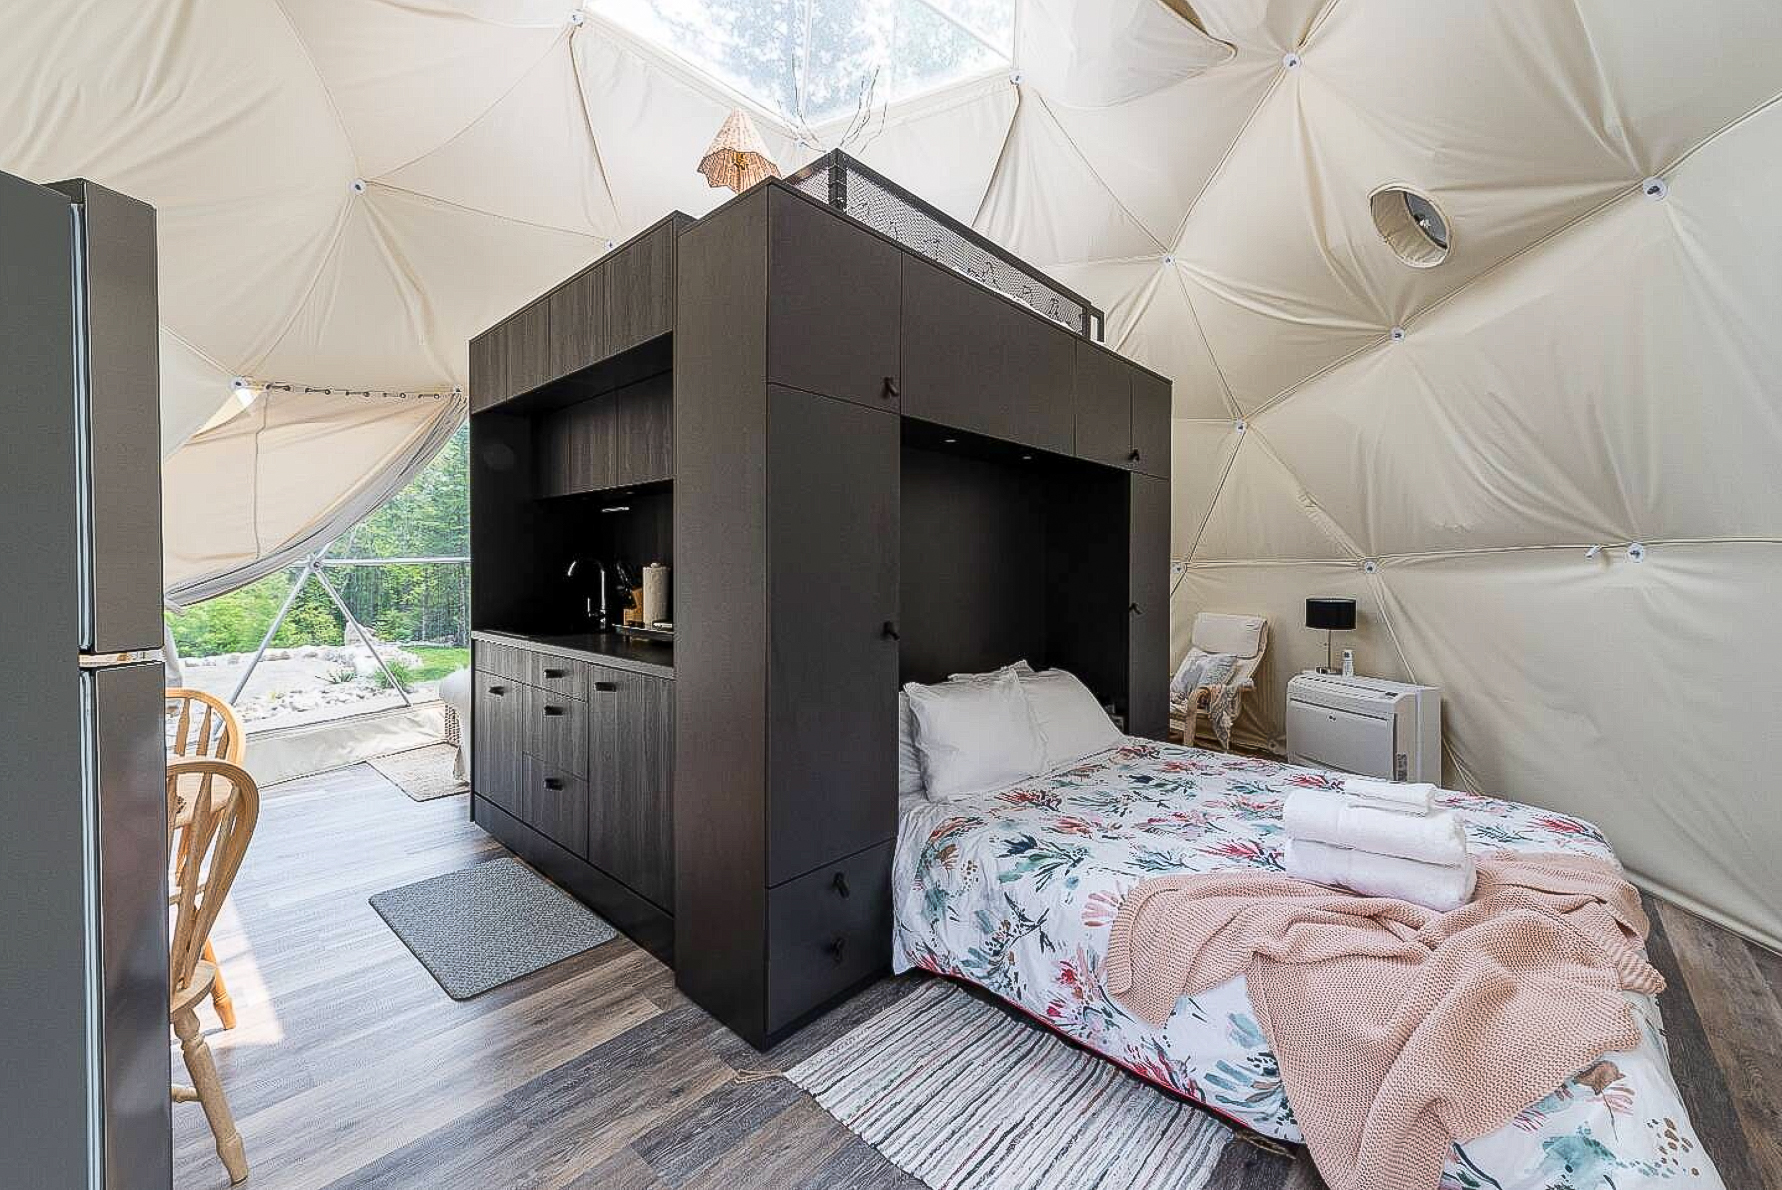 inside of geodesic dome with a interior module kitchen, interior module bedroom and a bed